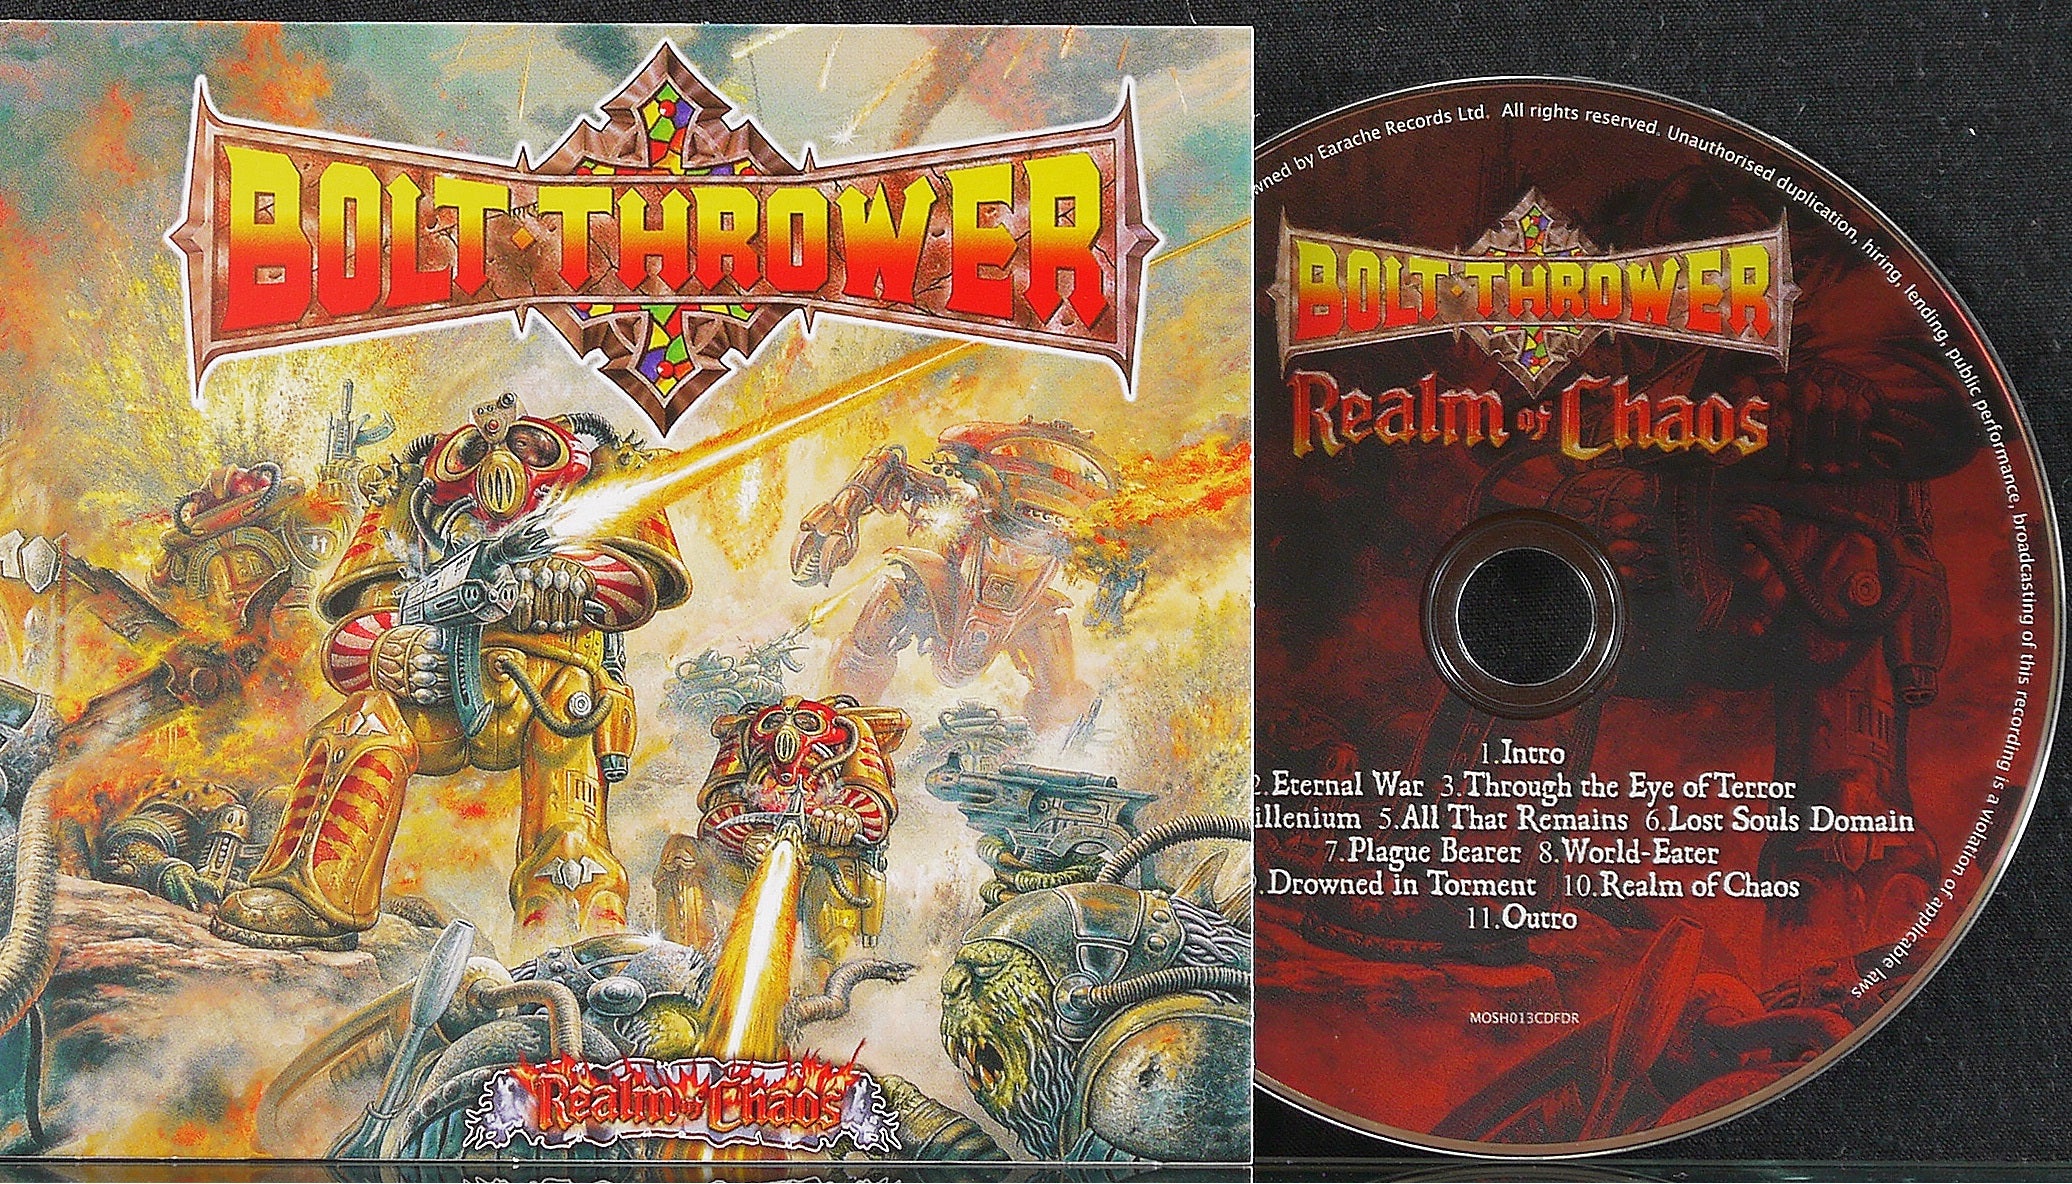 BOLT THROWER - Realm OF Chaos DigiCD